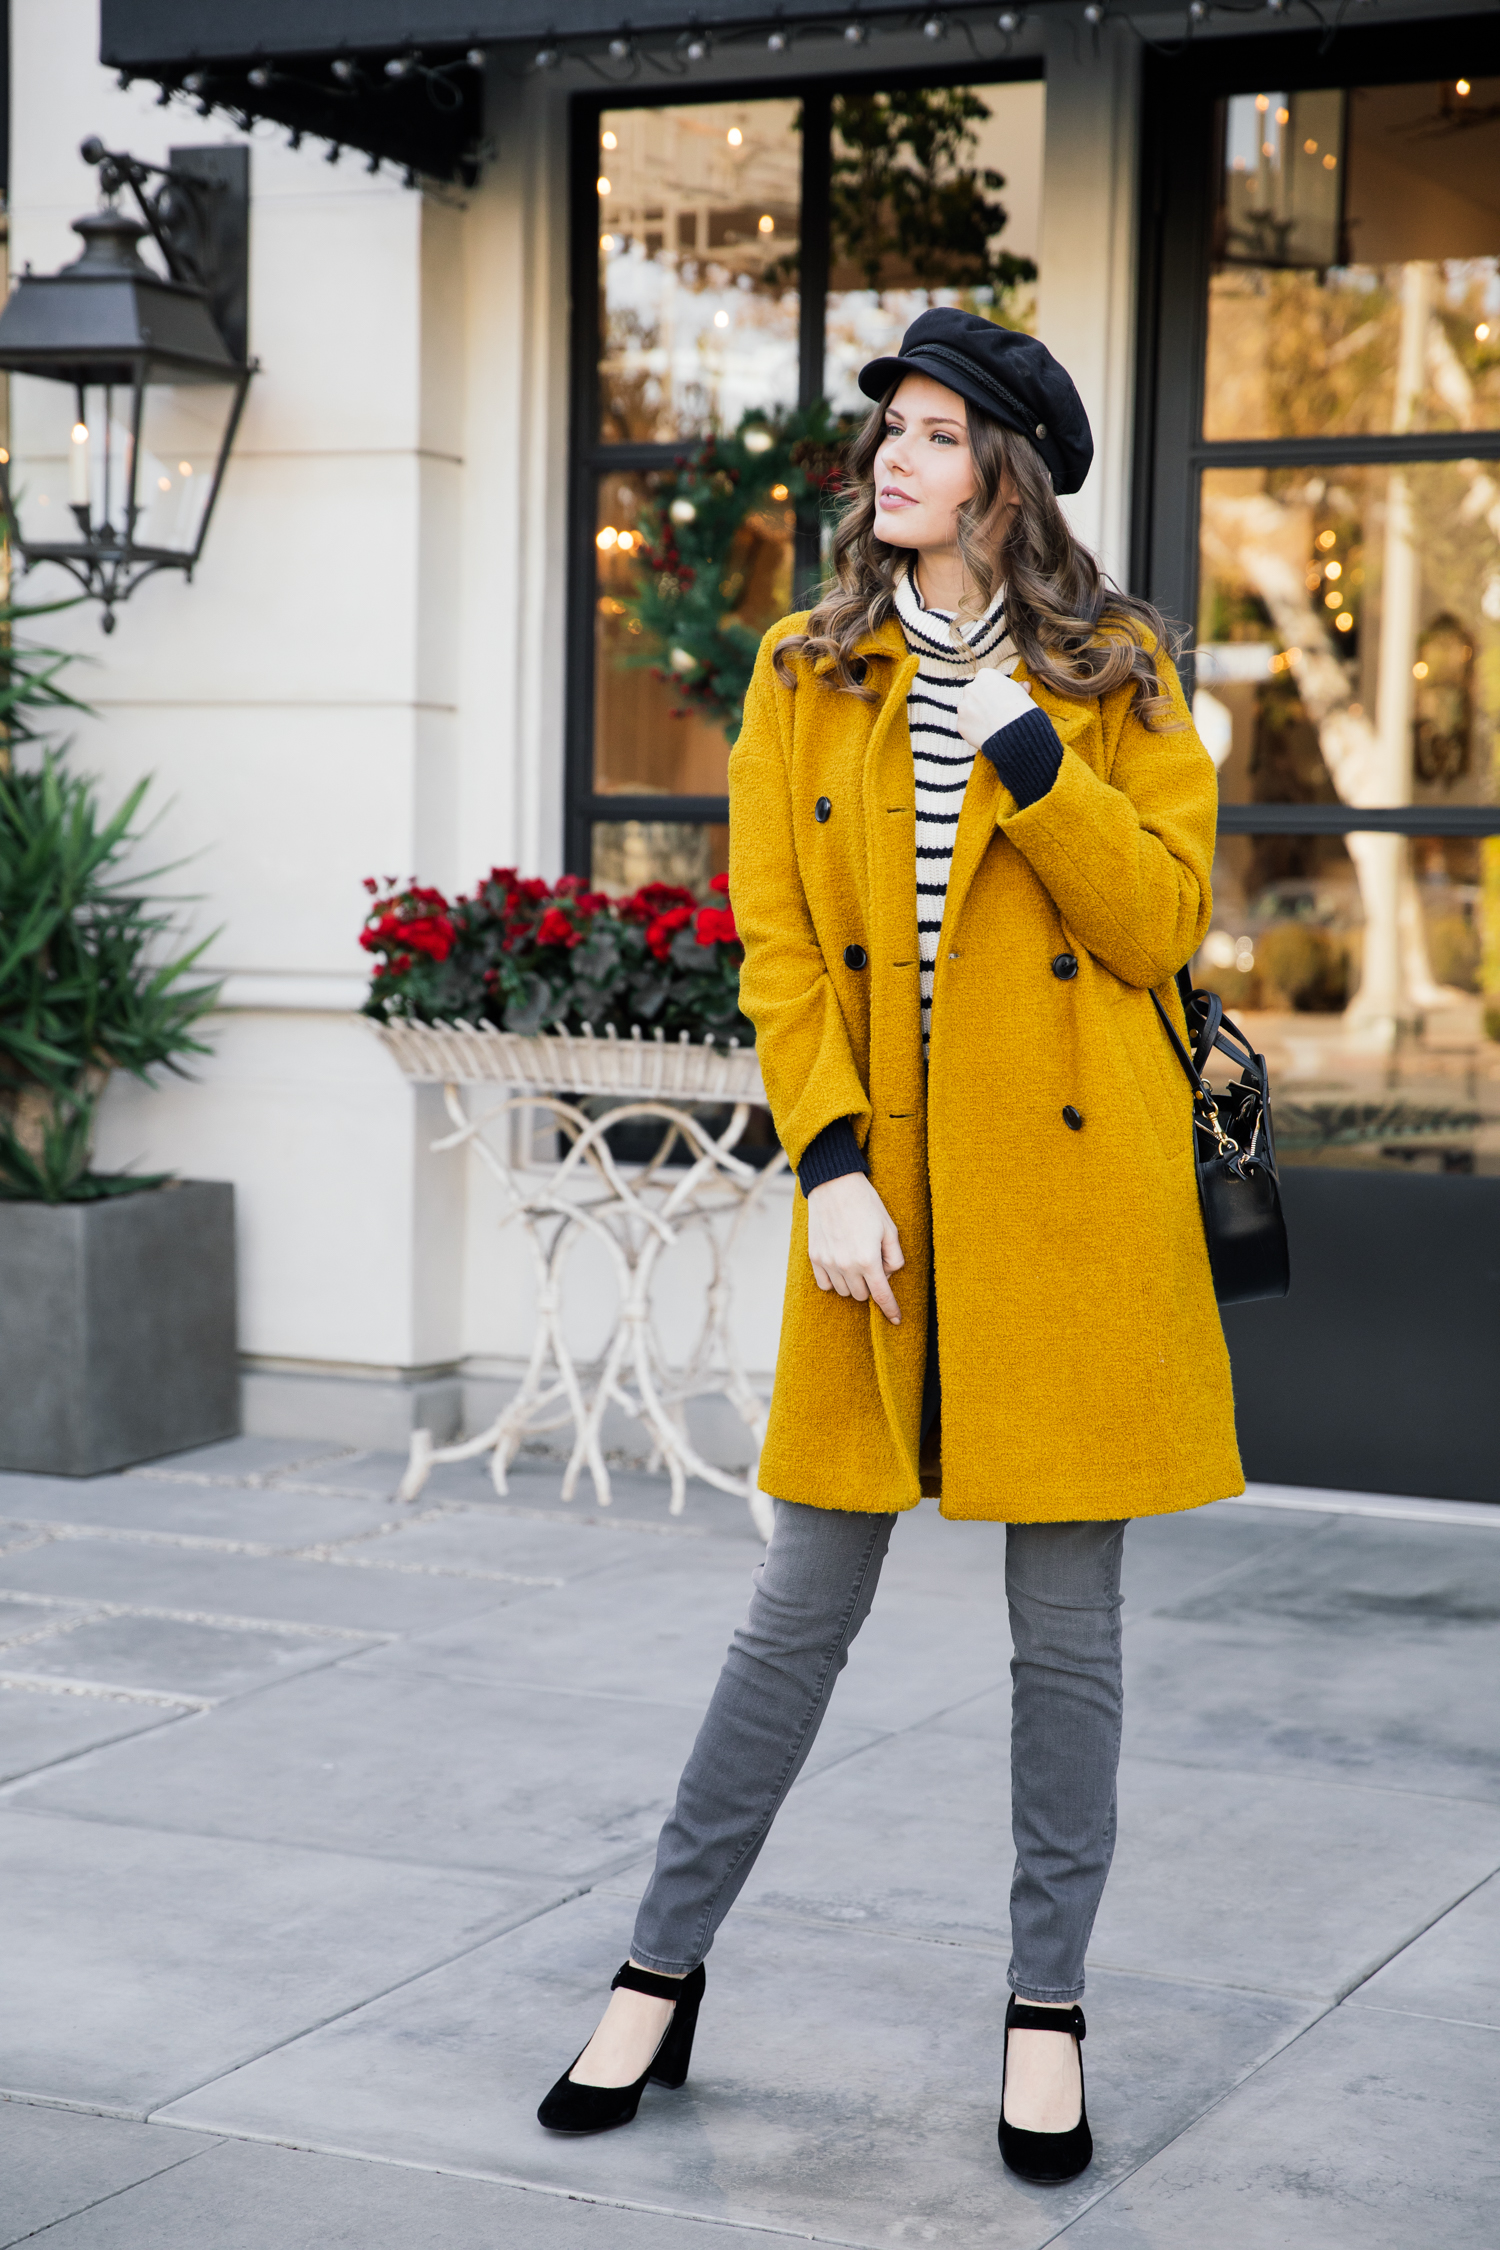 Alyssa Campanella of The A List blog shares her goals for 2018 wearing Madewell Double Breasted Coat and Clare V Alistair bag